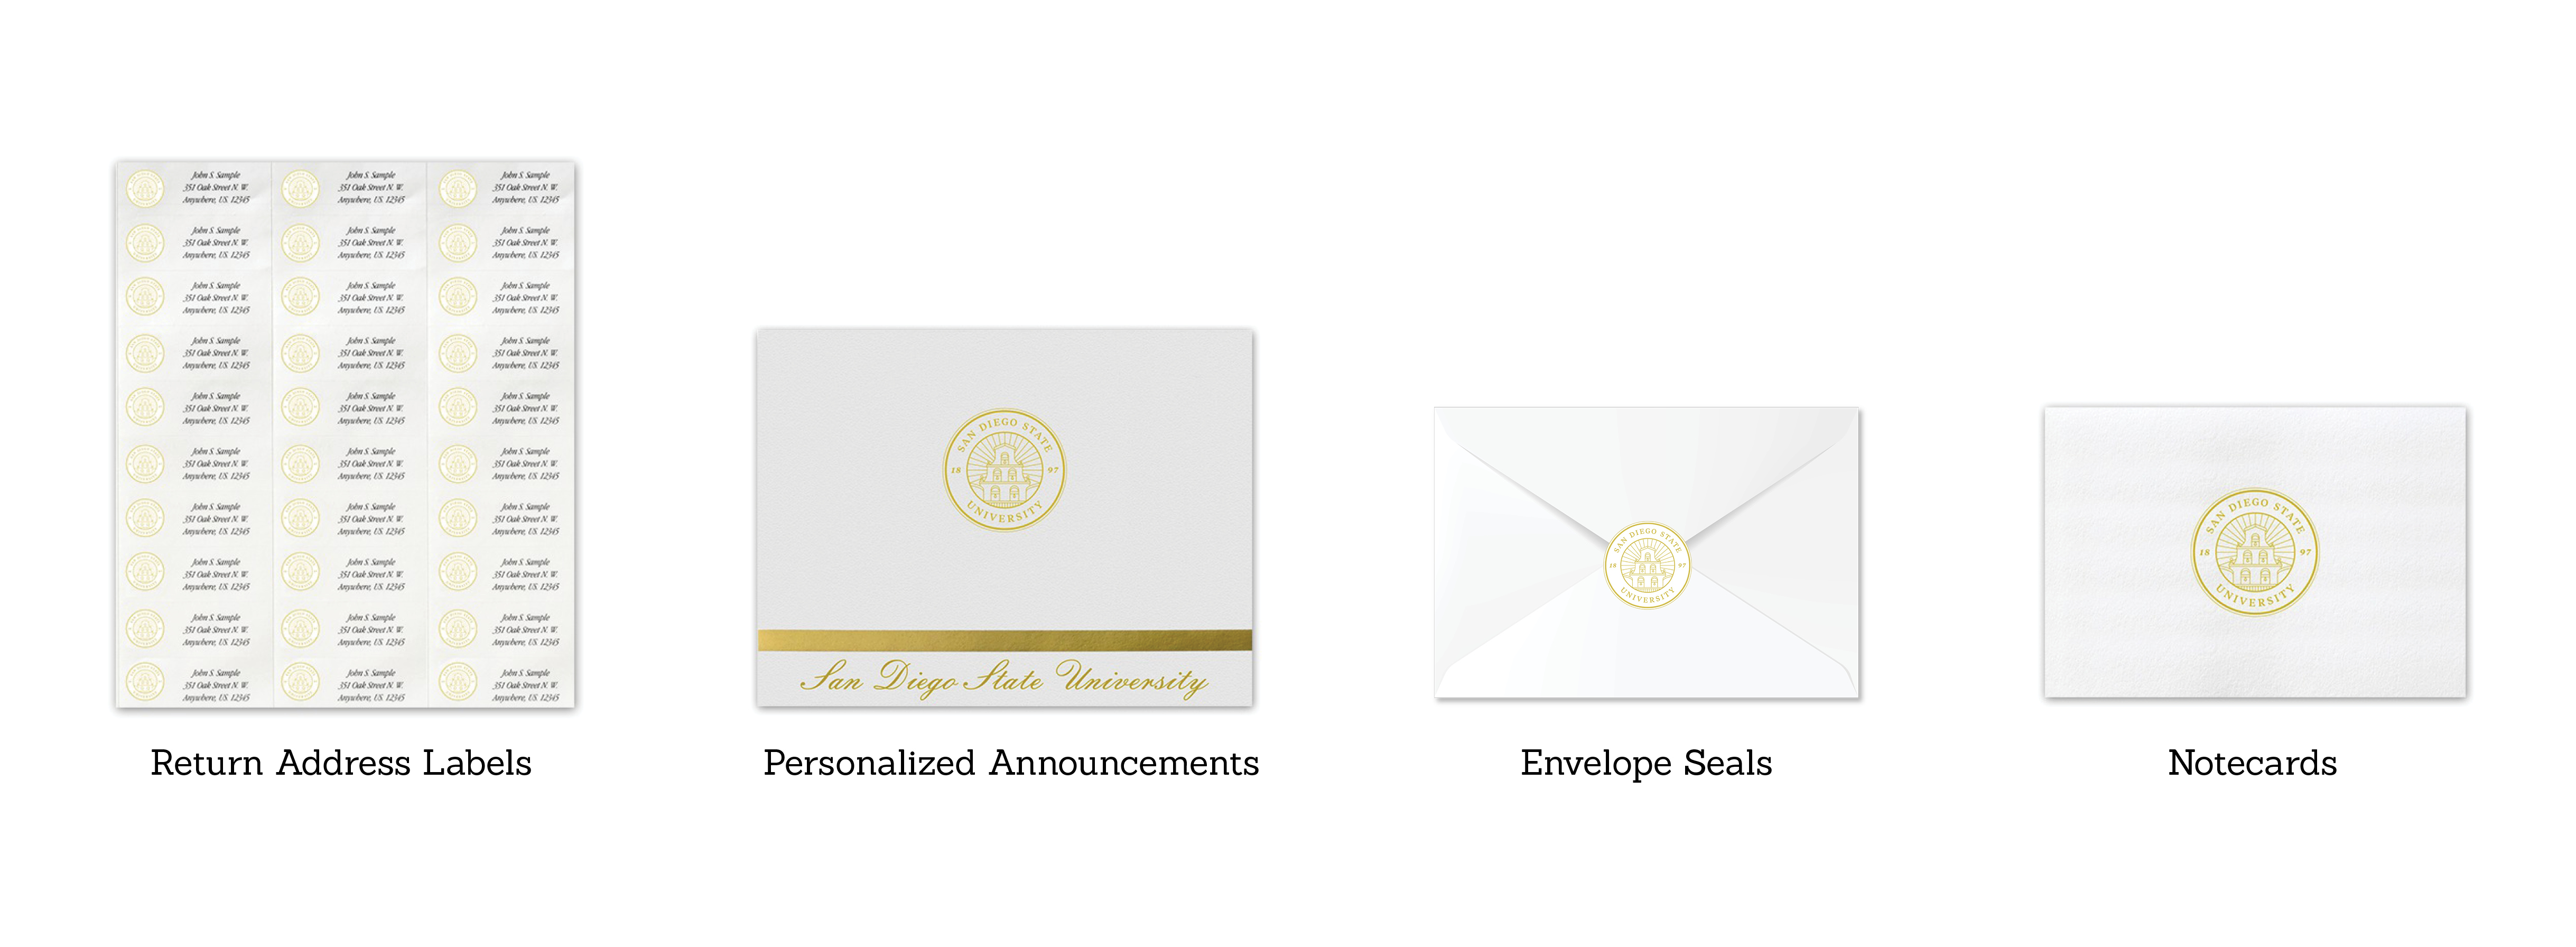 Personalized Announcements. Notecards. Return Address Lables and Envelope Seals.